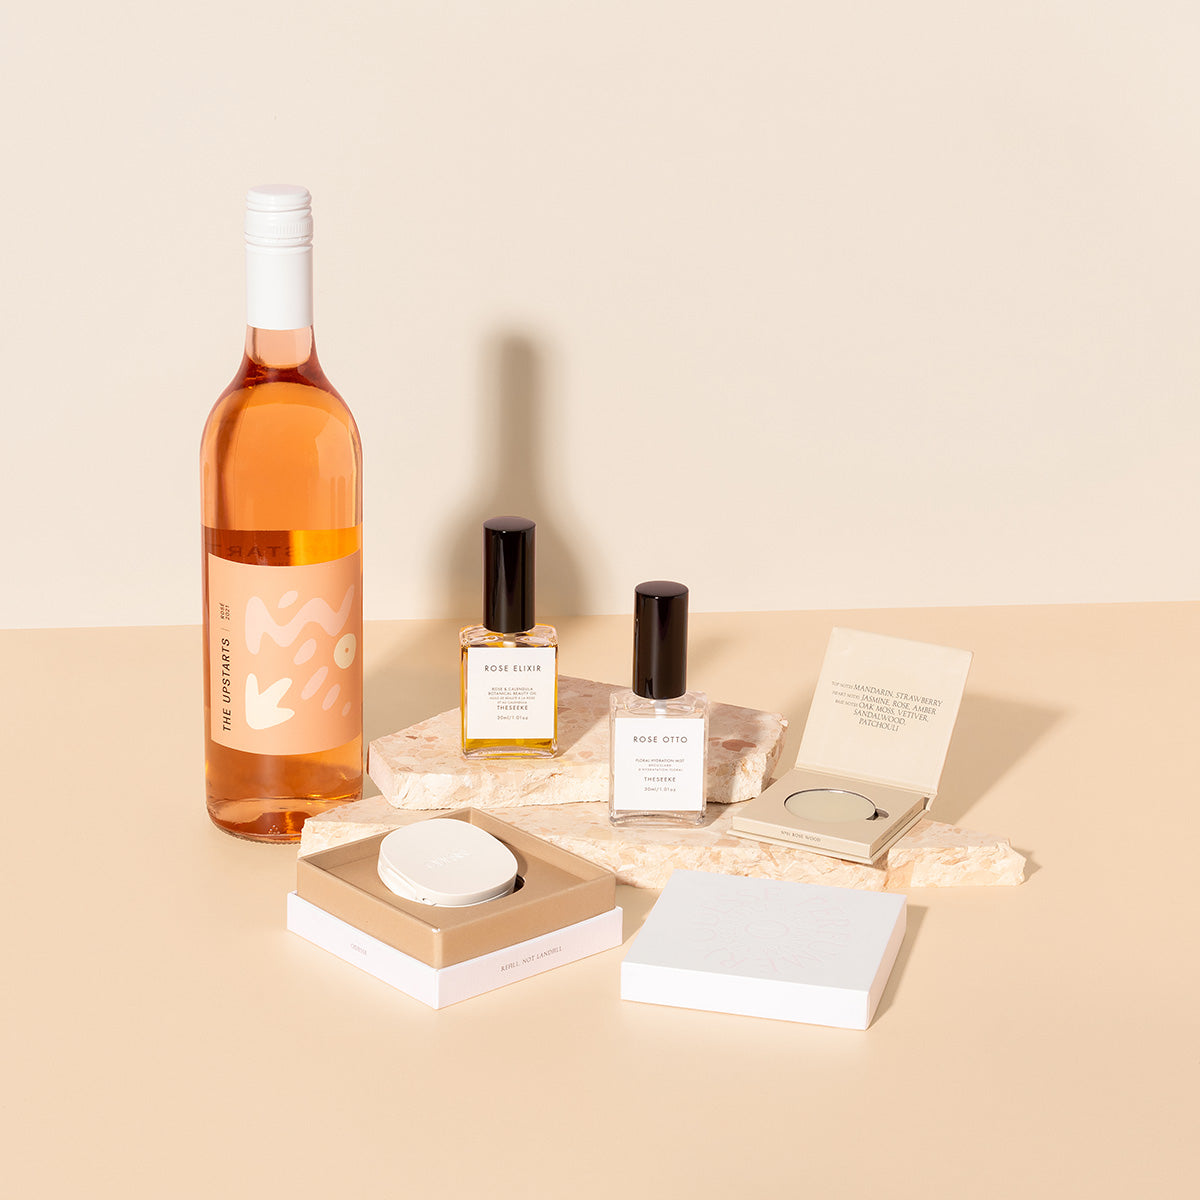 beauty gift hamper filled with Rose bottle of wine, beauty oil and mist , solid perfume with matching sustainable compact vessel 